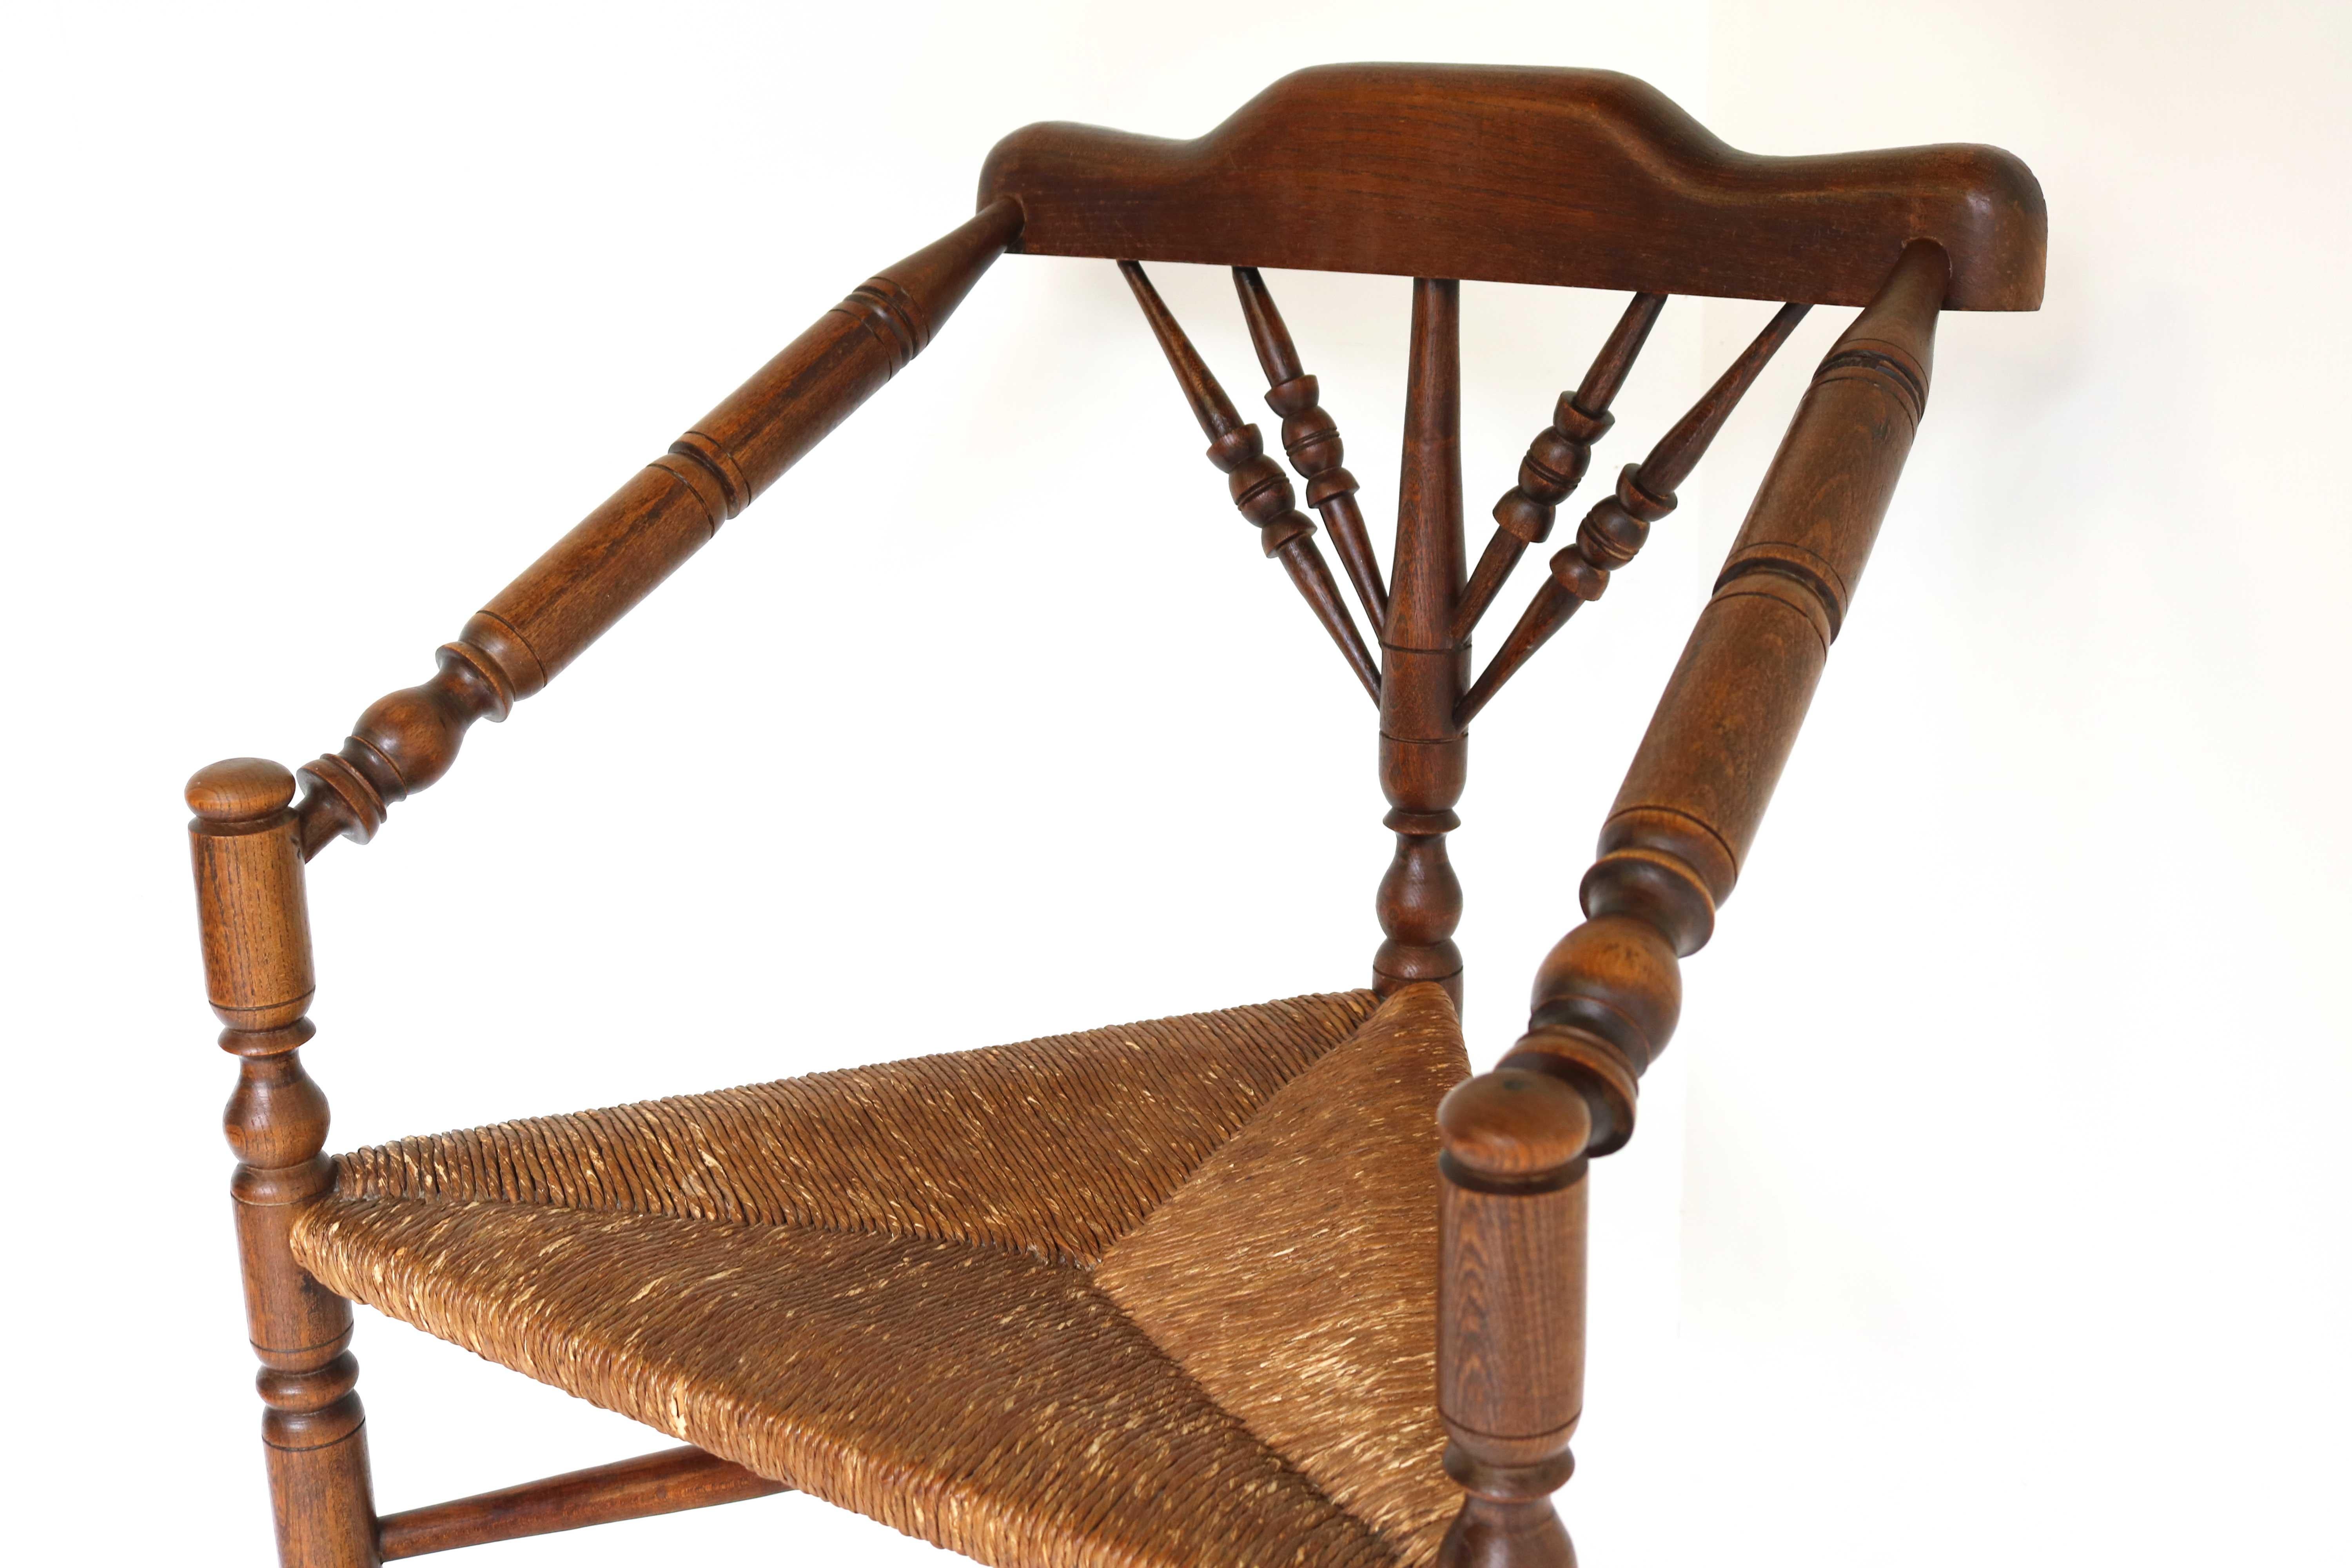 Antique Edwardian Style Triangular Corner Chair Rush Seat Knitting Armchair 1900 For Sale 4